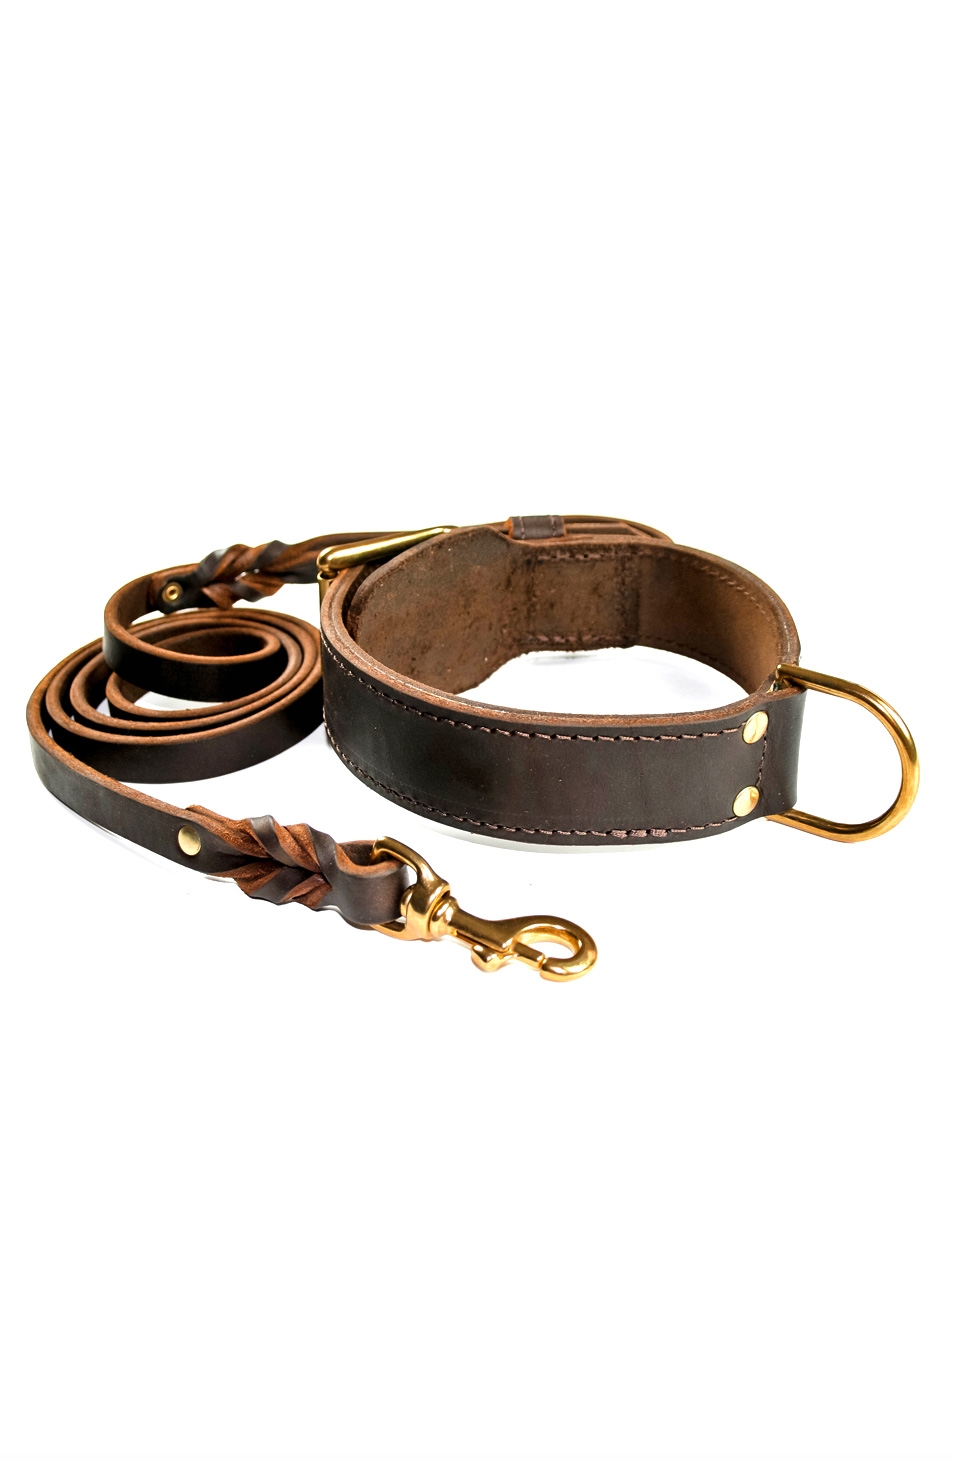  Dog Leather Collar and 4 ft Leash, KUDES Adjustable Basic  Collar with Bell Leather Pet Leash Set, Checkered Pattern Durable Leather  Collar and Leash with Metal Buckle for Small Medium